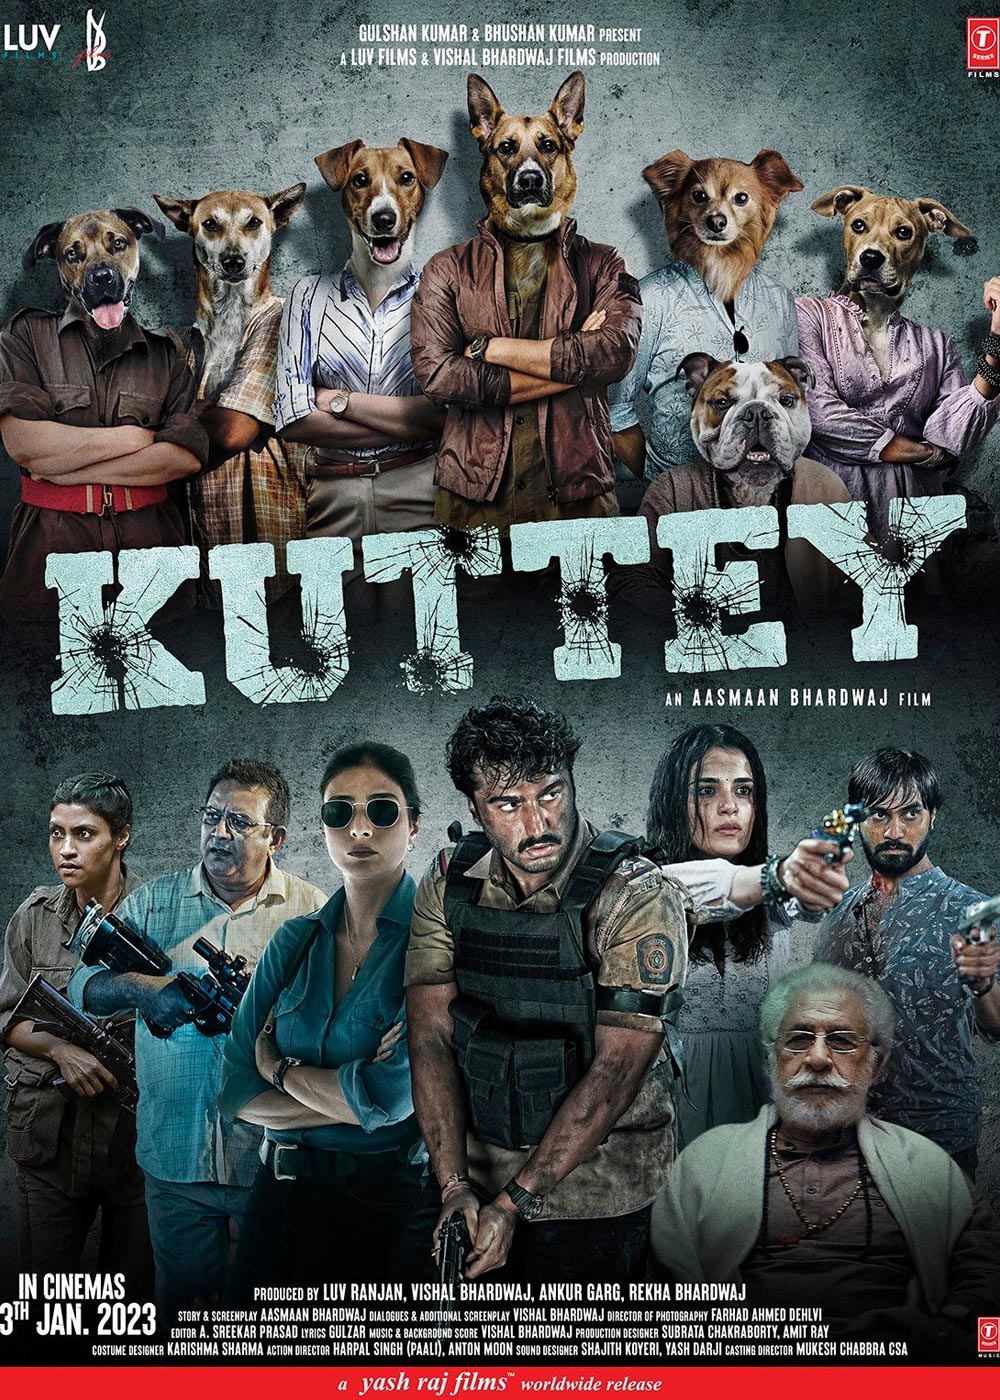 kuttey bollywood movie review